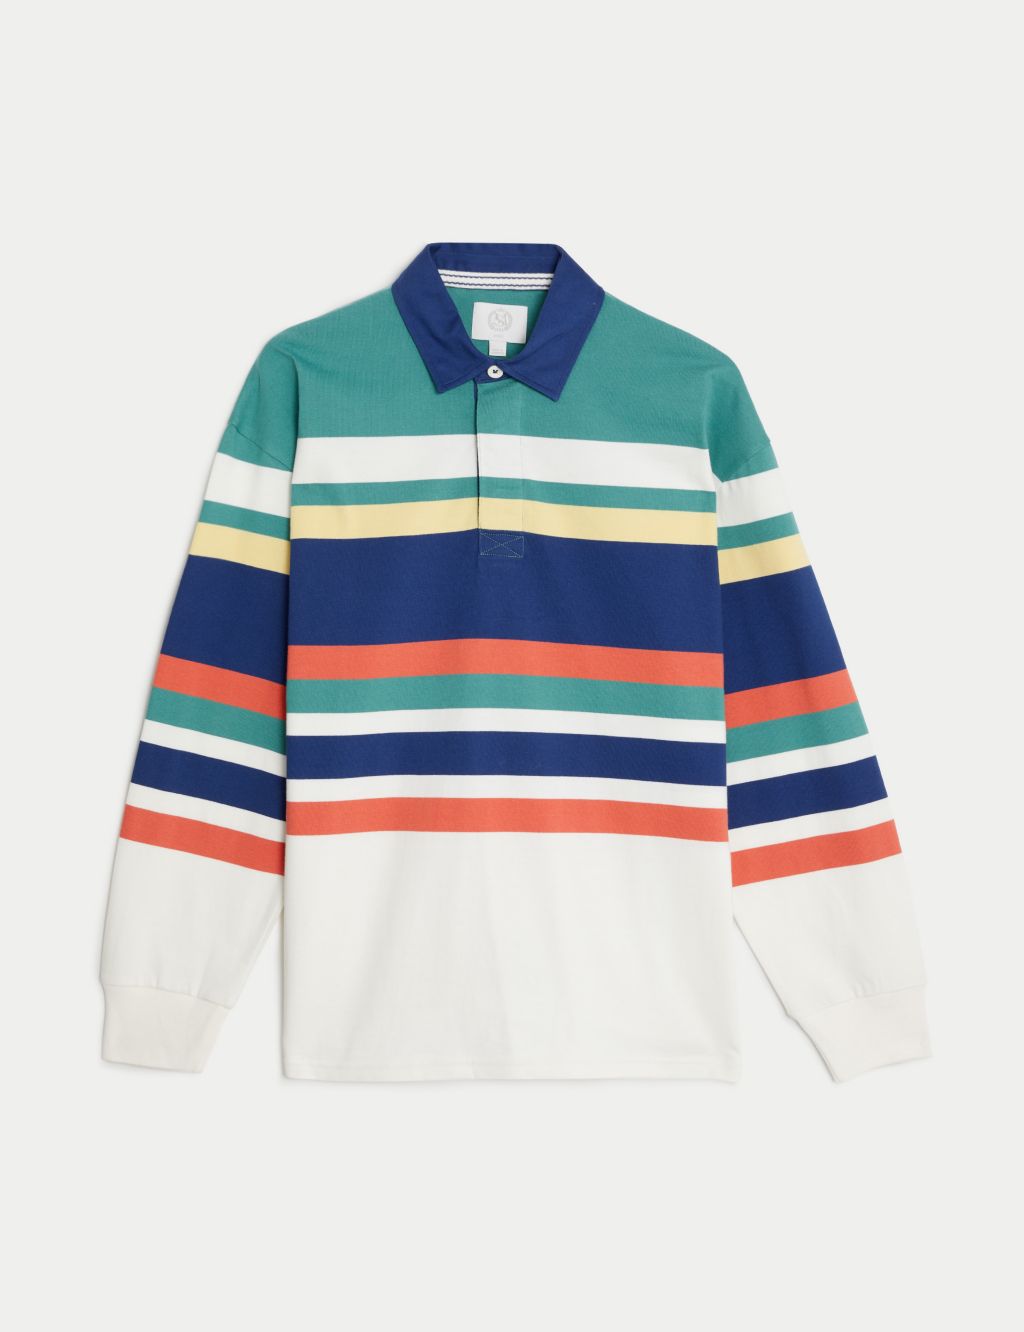 Pure Cotton Colour Block Striped Rugby Shirt image 2